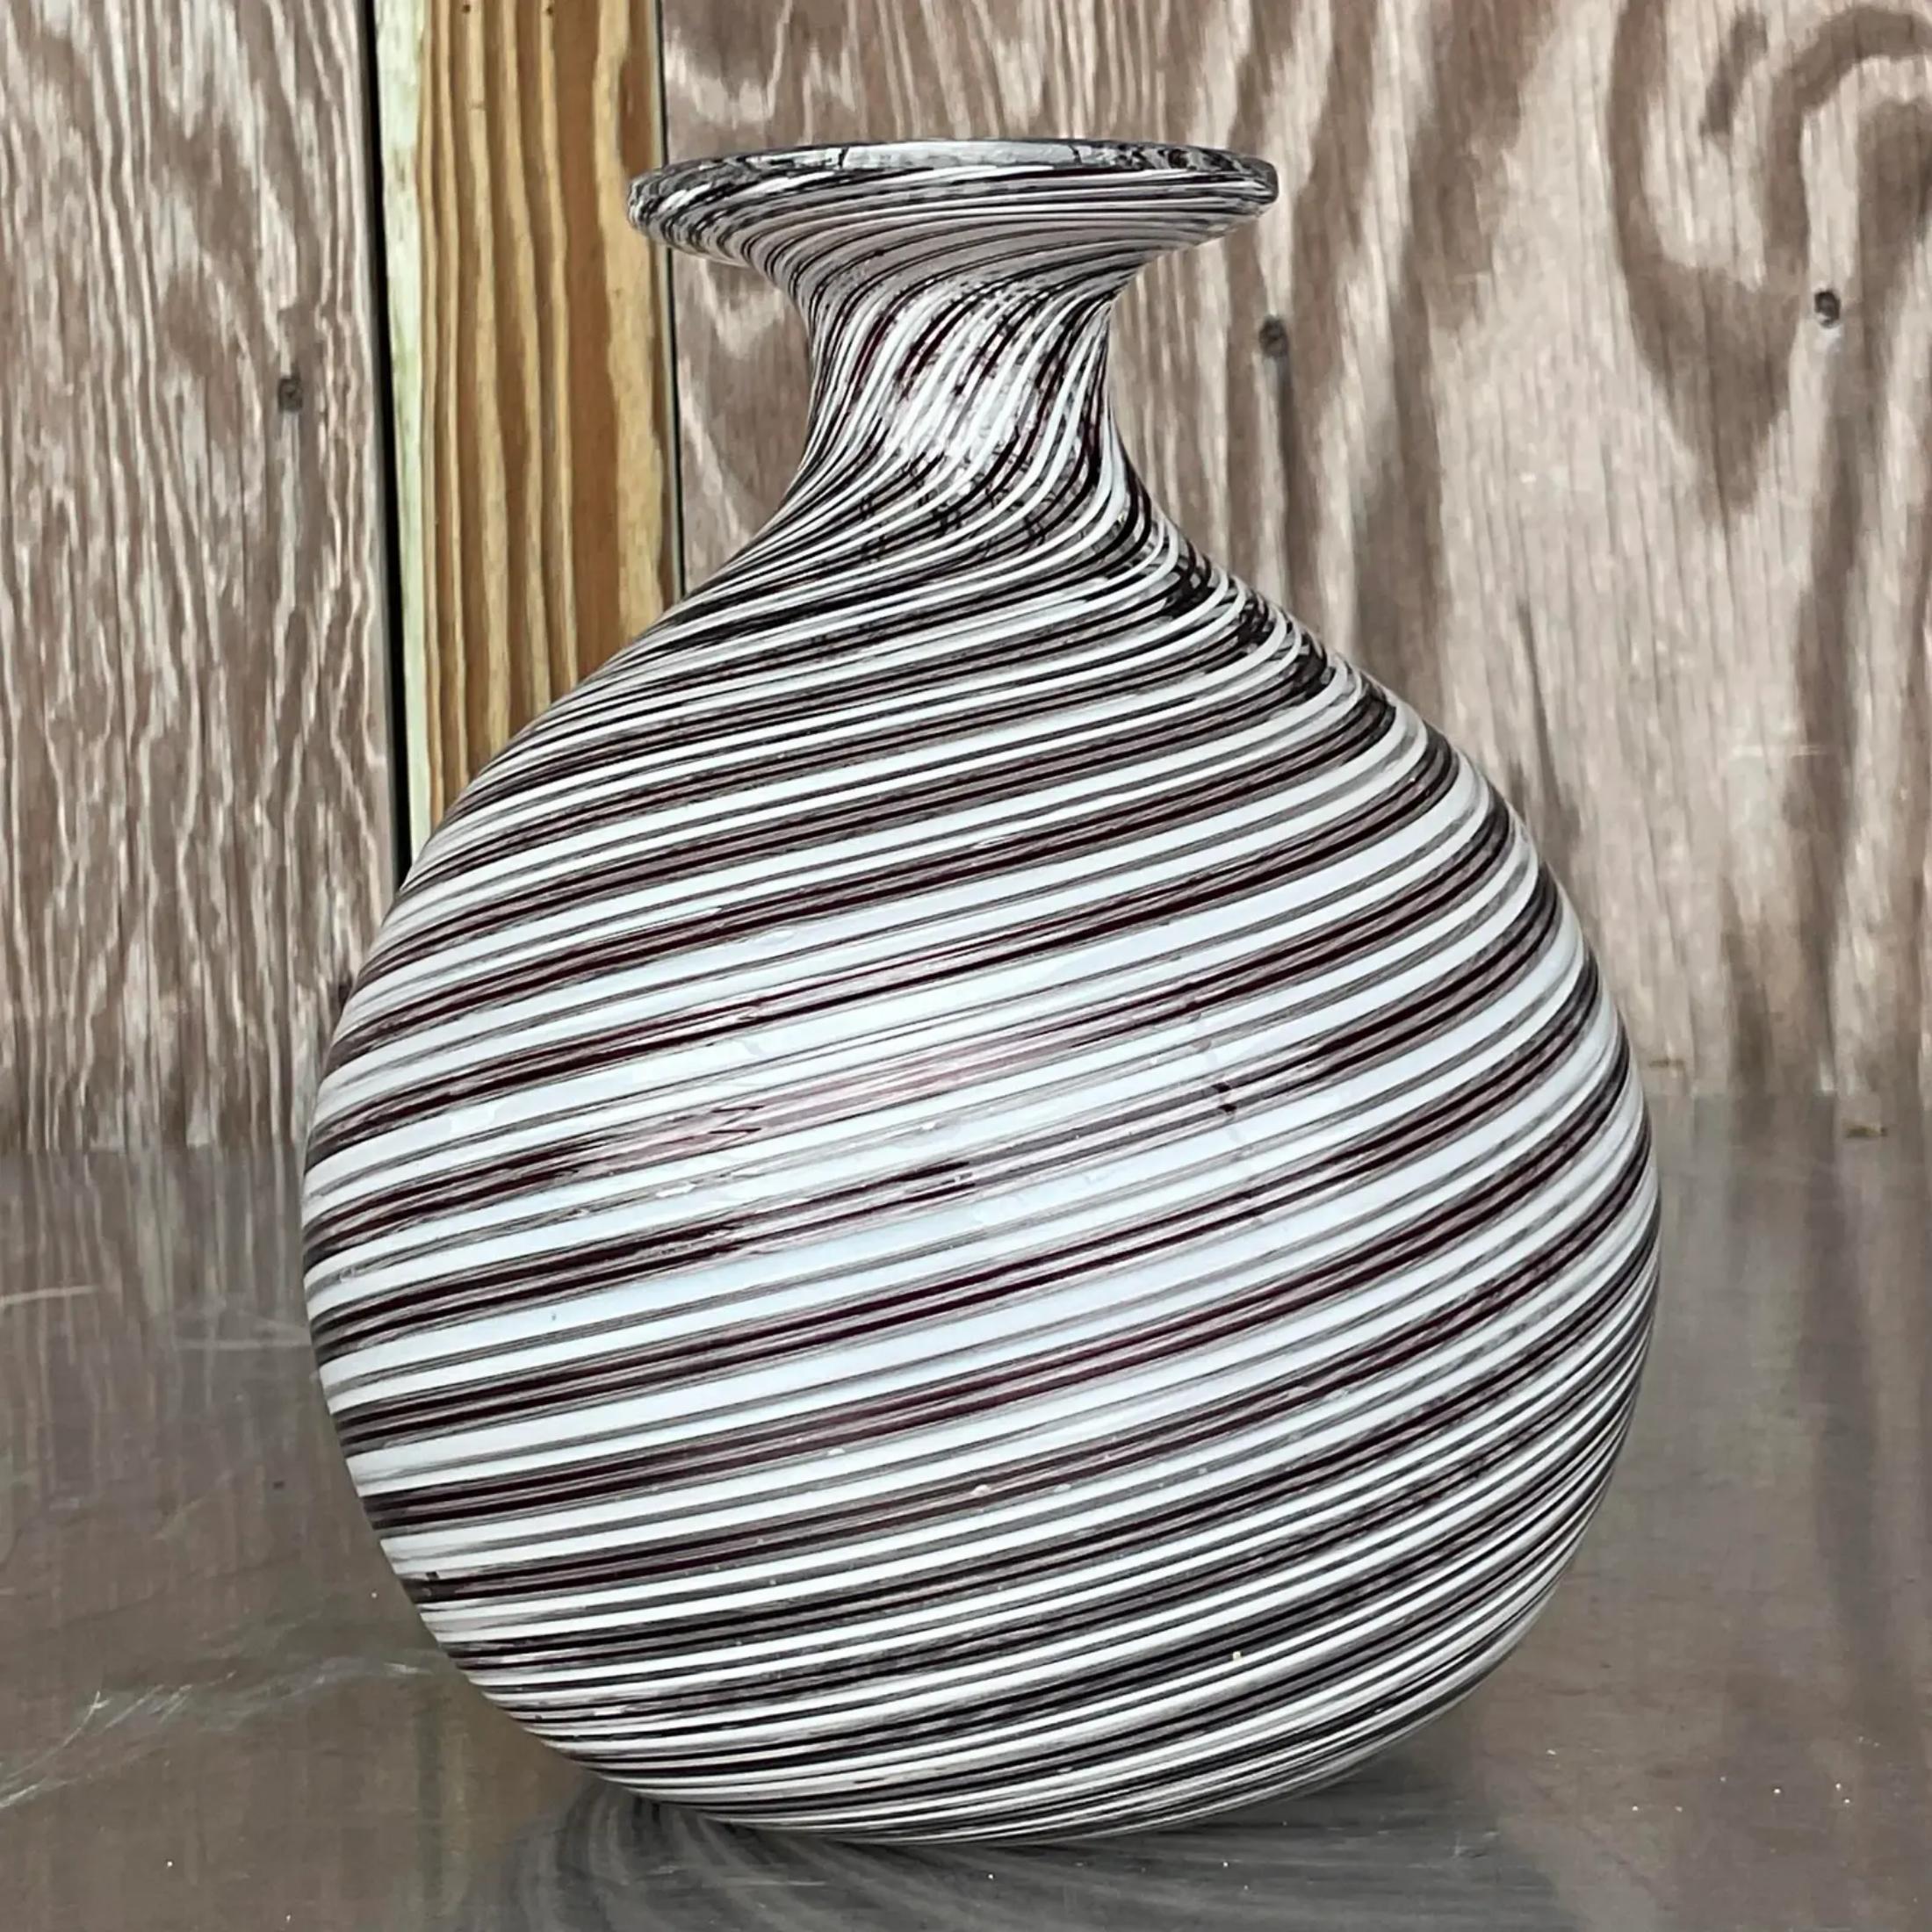 A fabulous vintage Boho Art glass vase. A chic swirl design in graphic black and white. Signed and numbered on the bottom. Acquired from a Miami estate